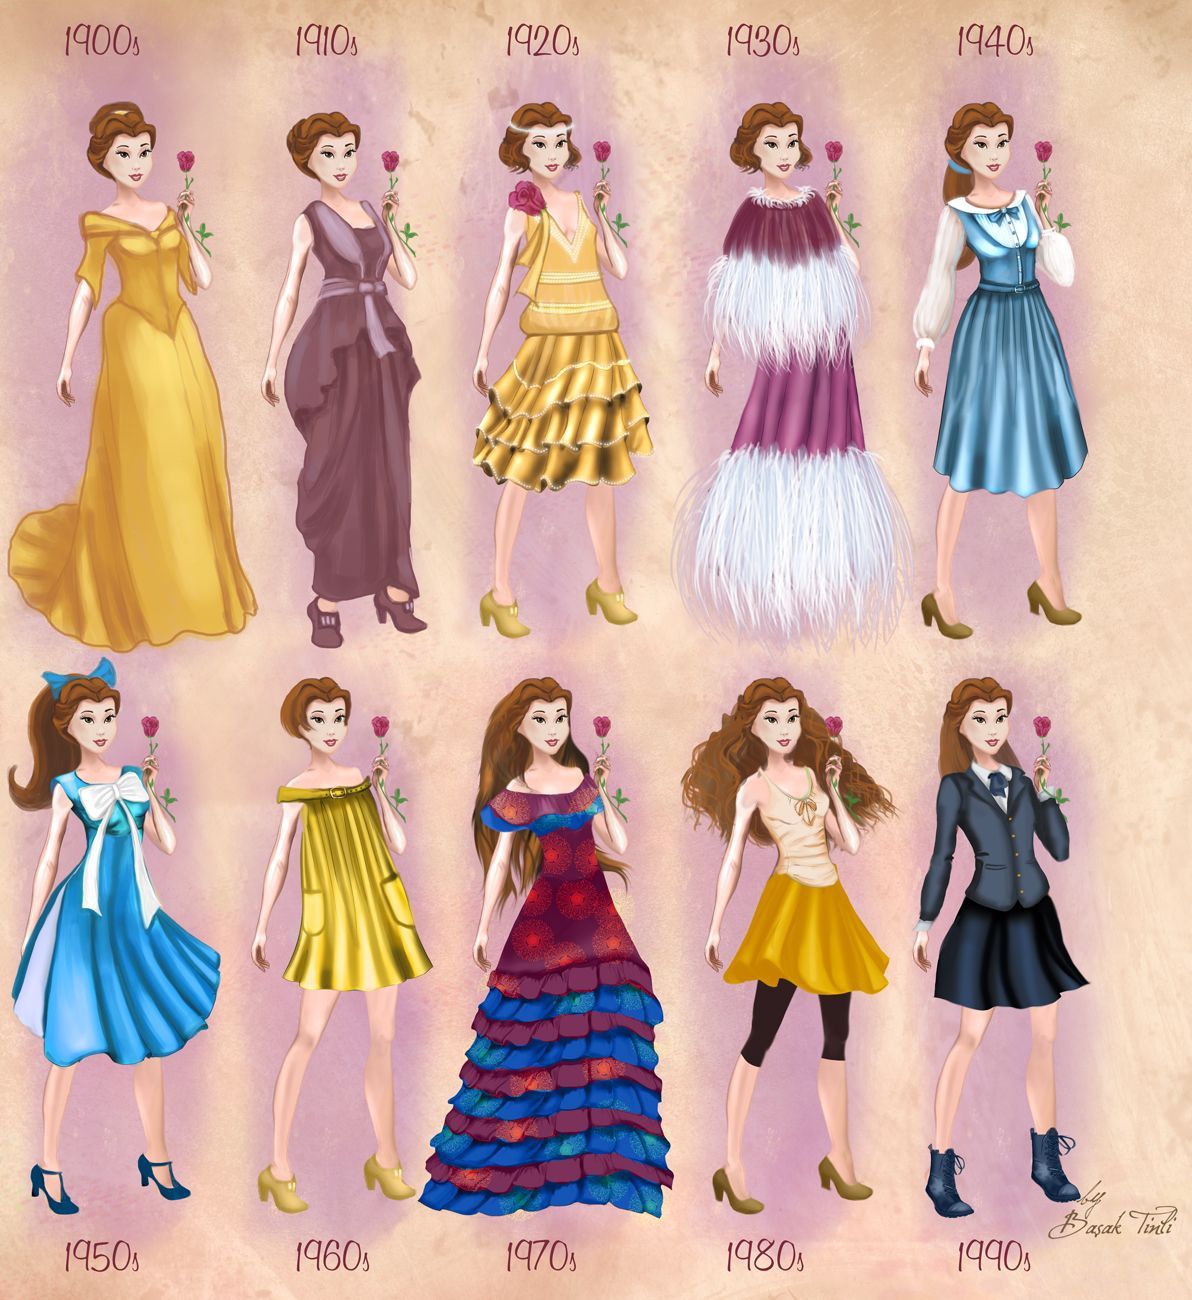 Belle in in 20th century fashion.